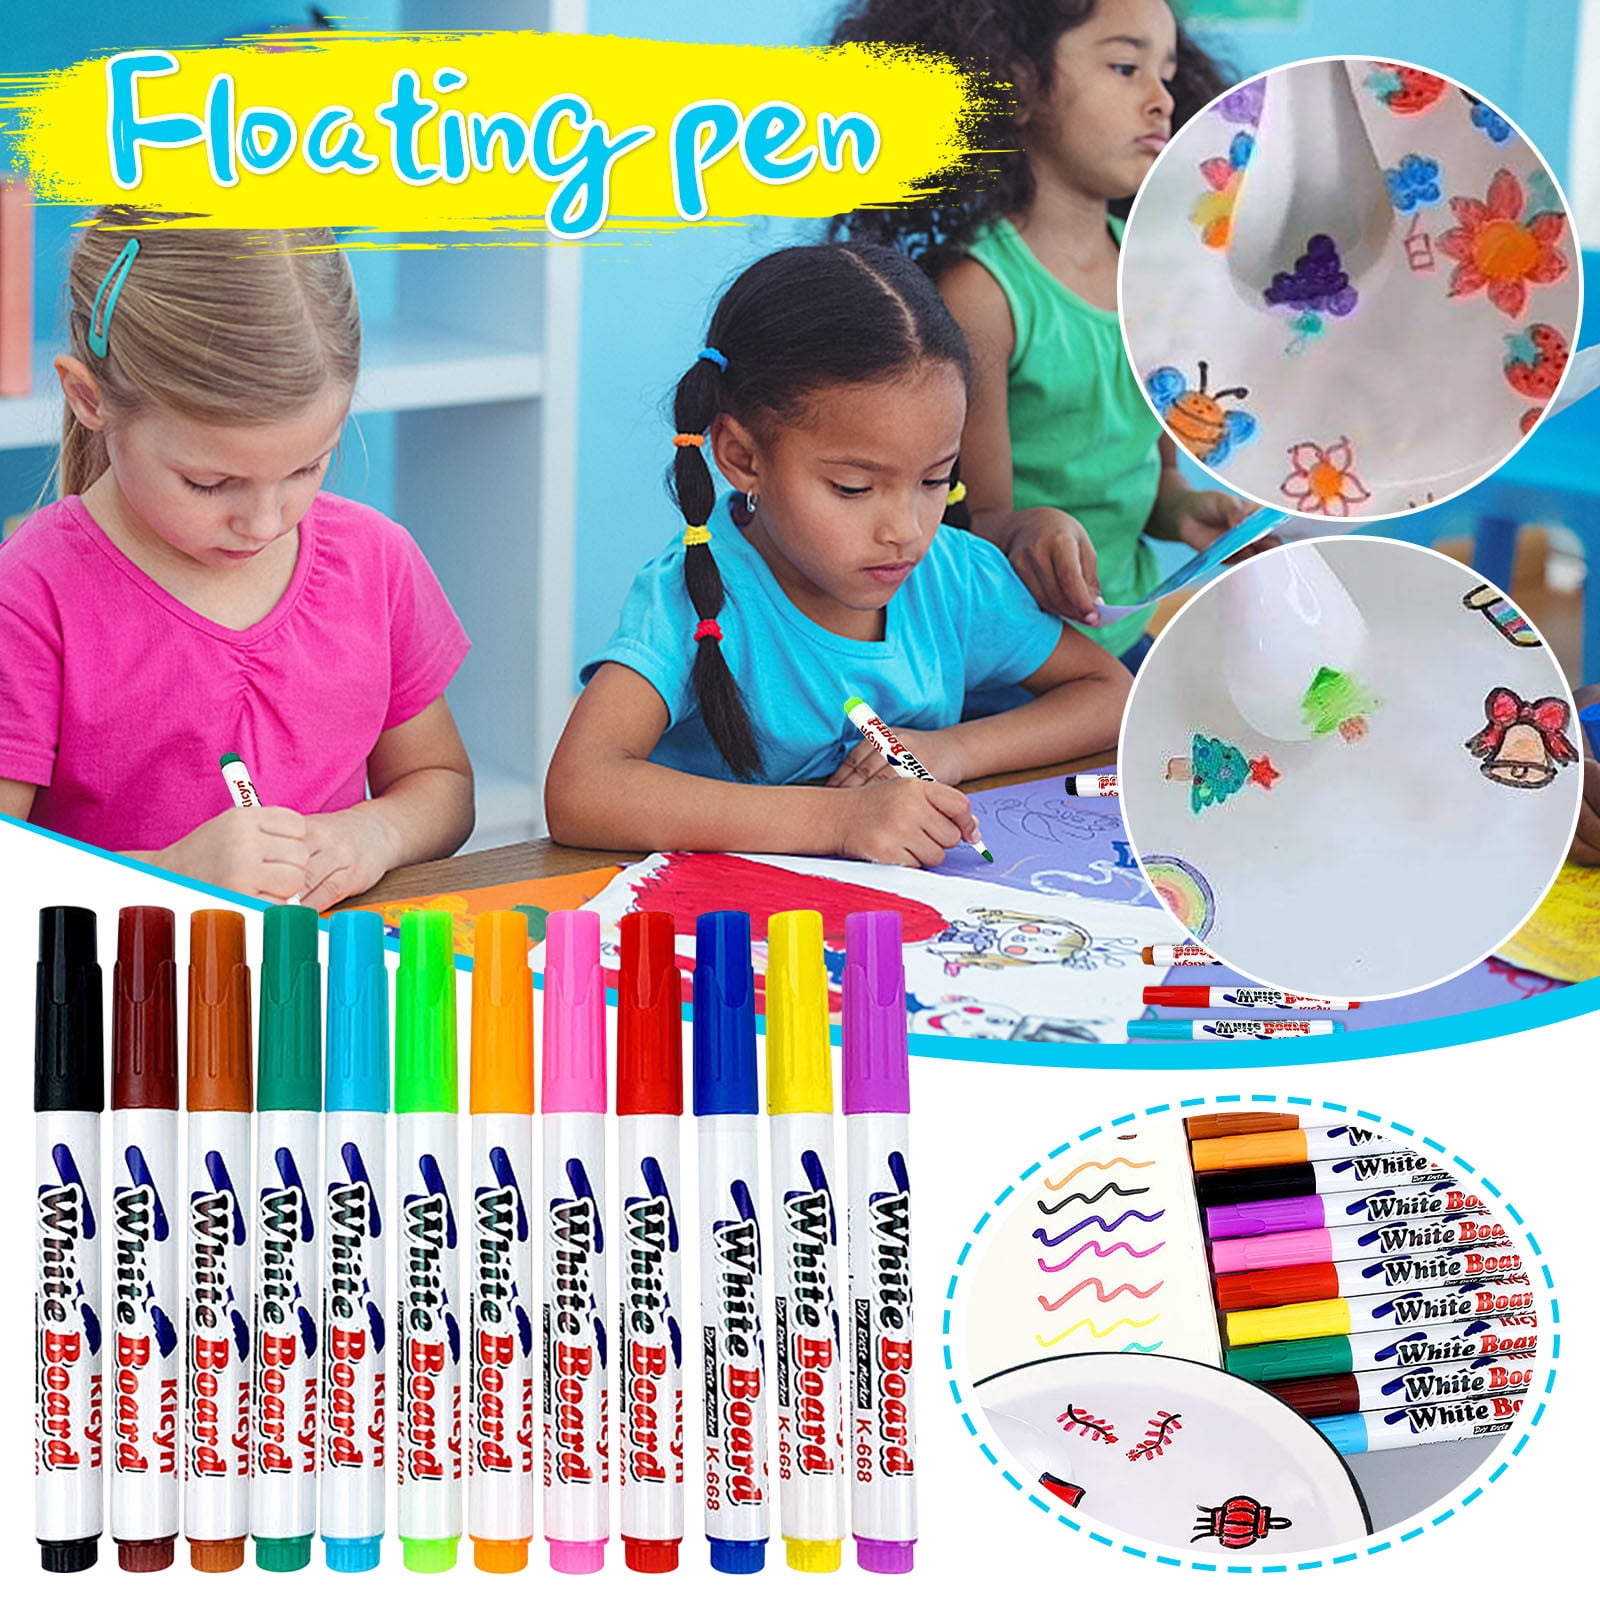 Taoelifs Magical Water Painting Pens for Kids,12PCS Doodle Water Floating Pen, Fun Whiteboard Pen for Kids Gift Set (with Ceramic Spoon)